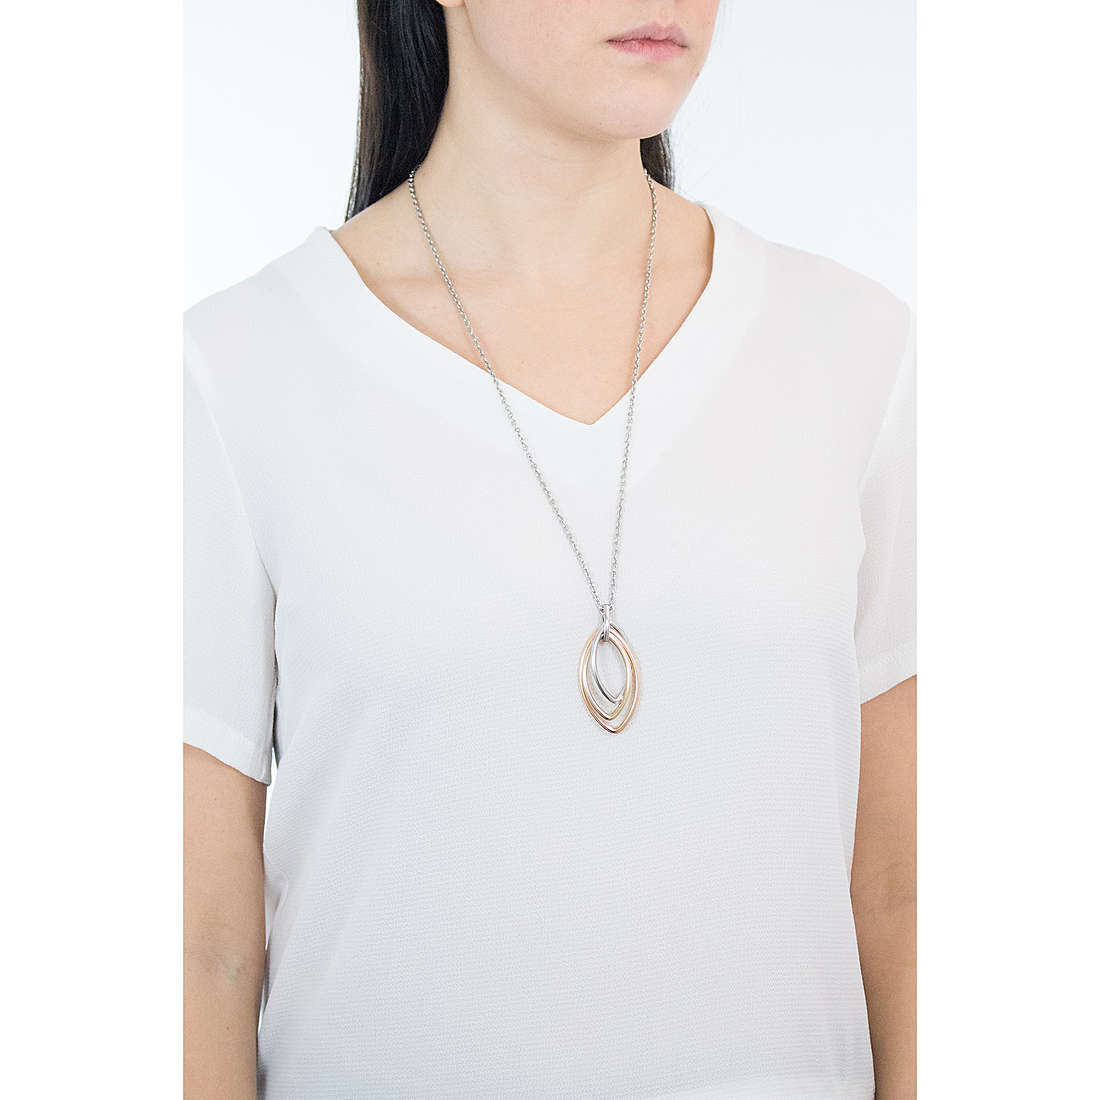 Fossil necklaces Classics woman JF02779998 wearing